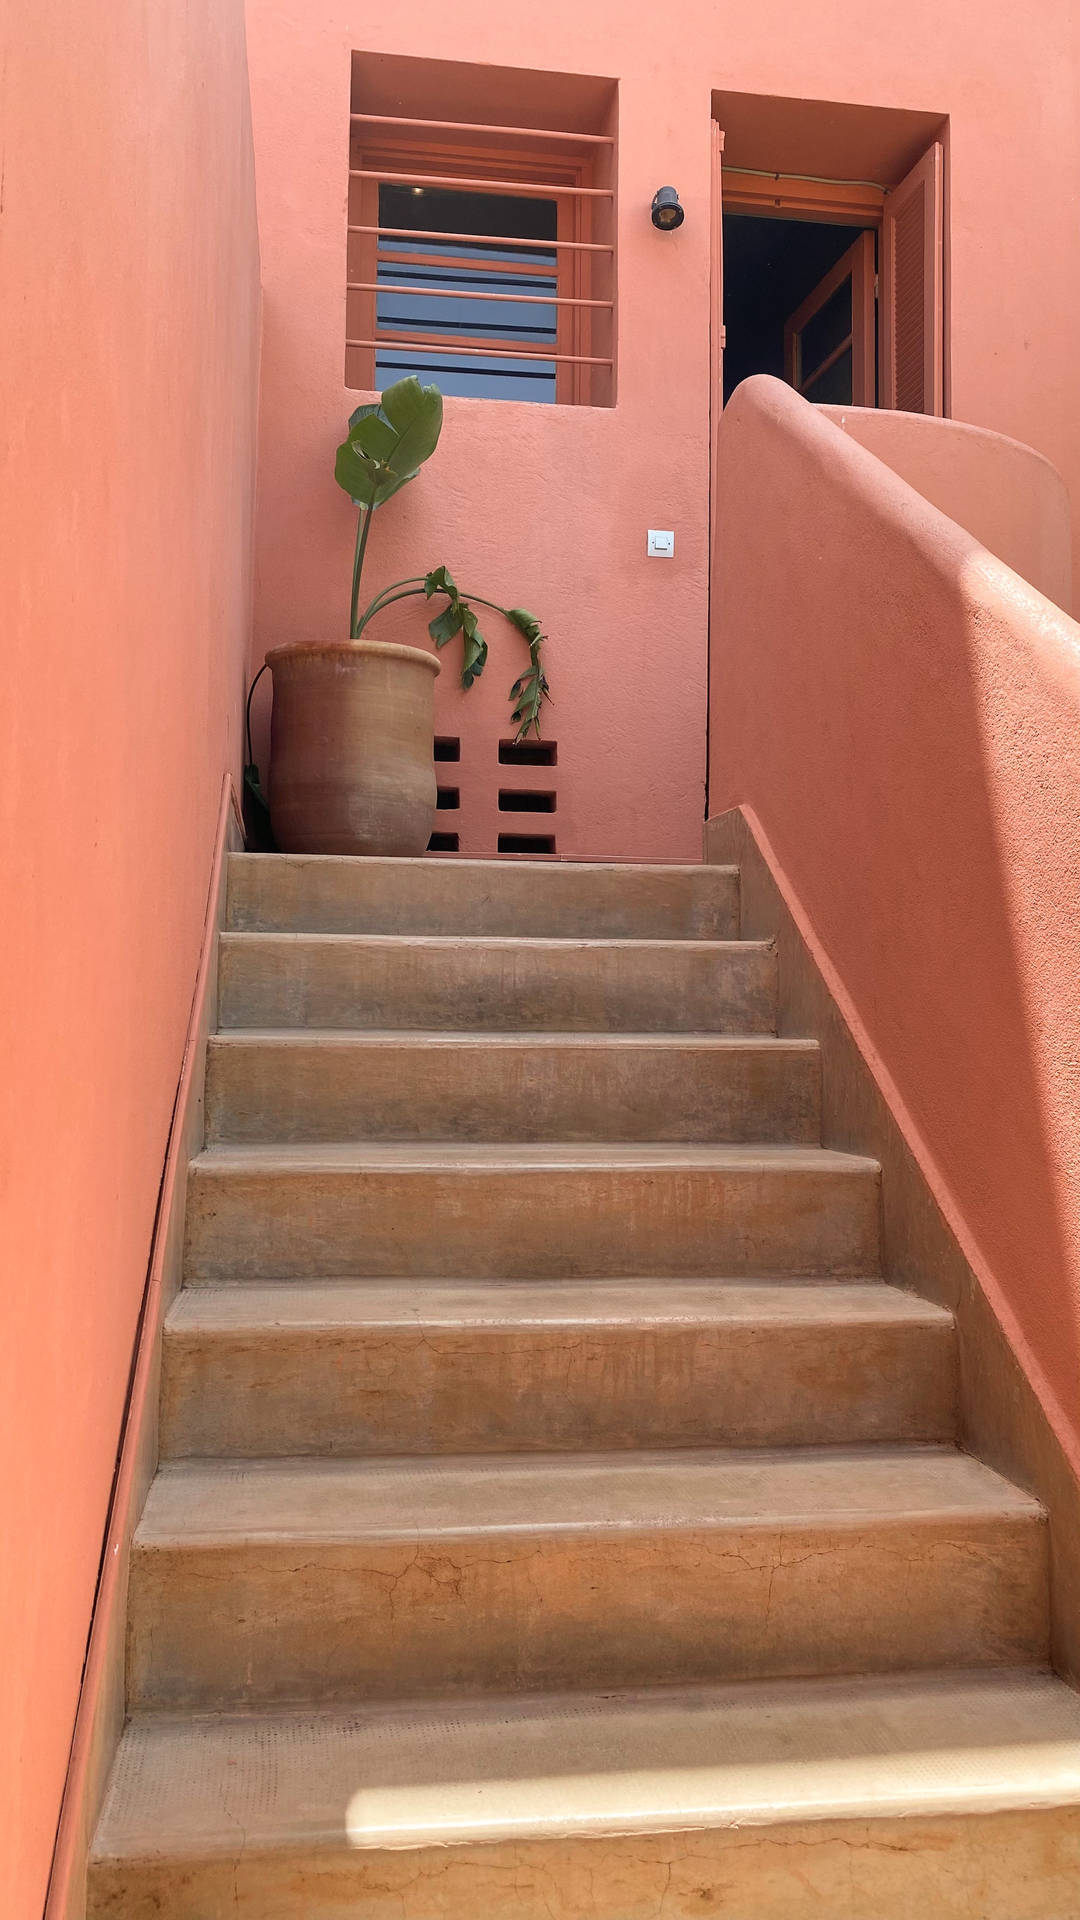 A stairway leading up to the second floor - Terracotta